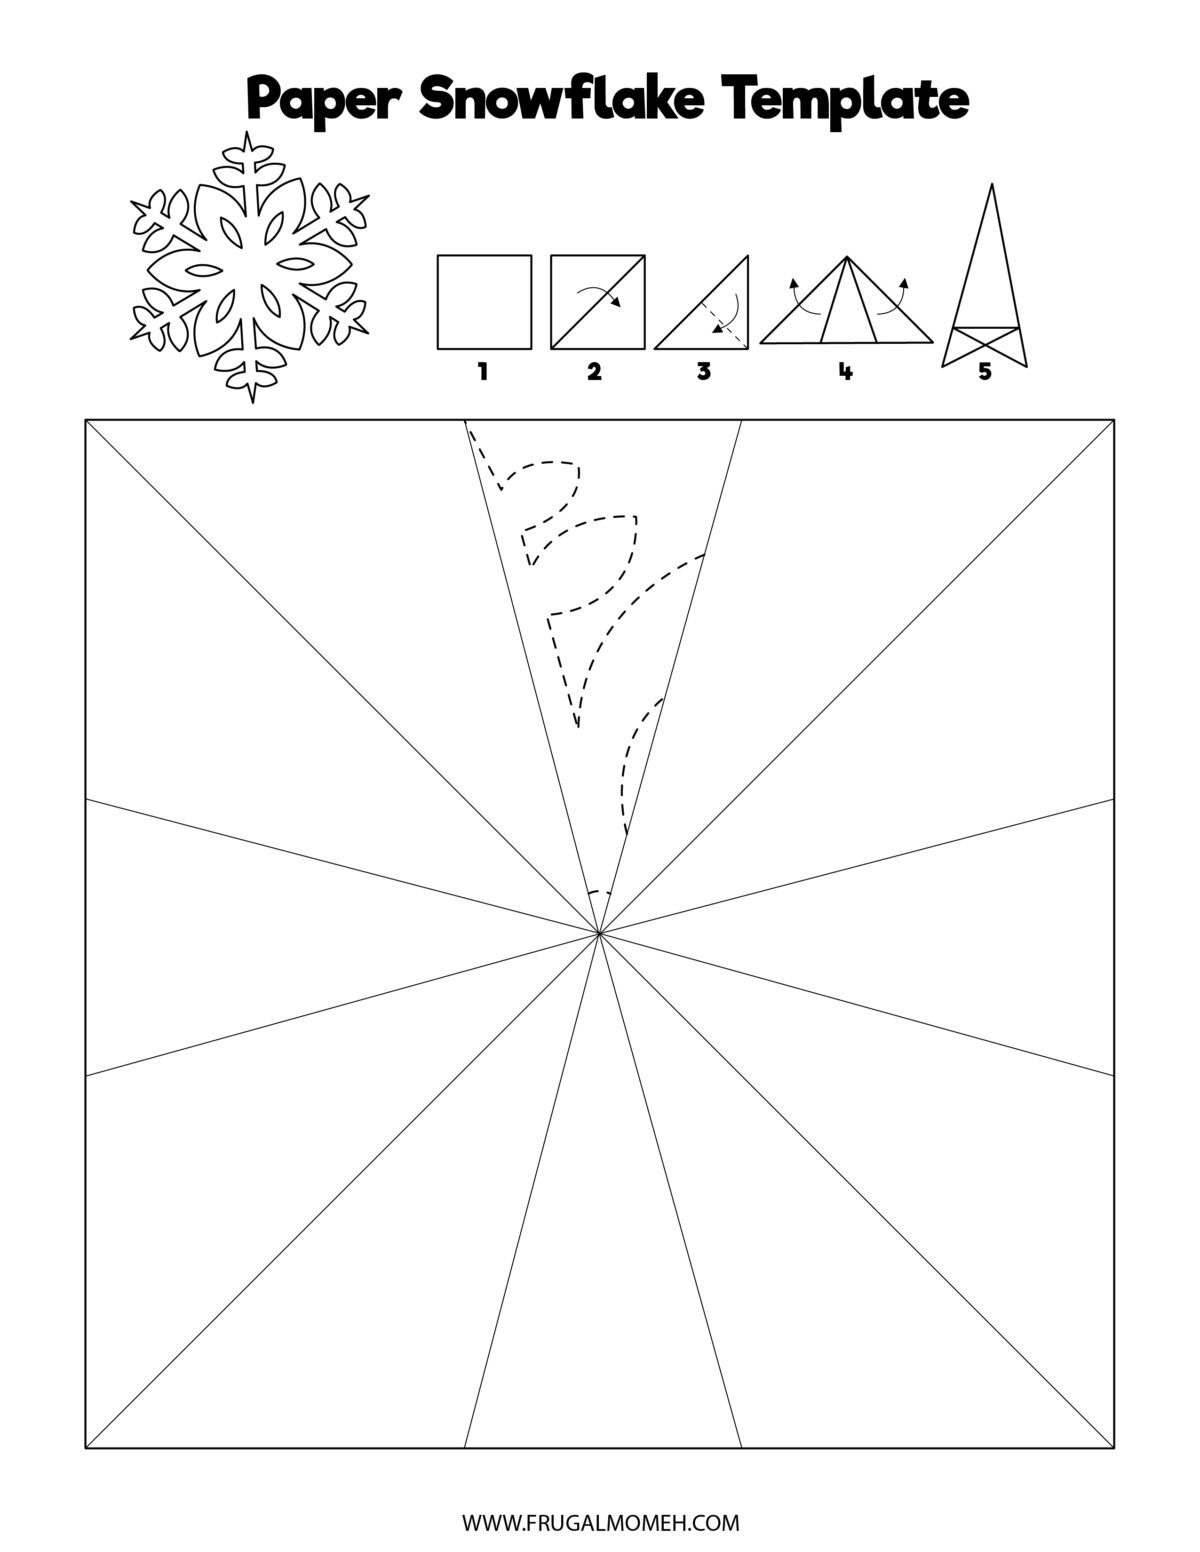 Looking for some free printable paper snowflake templates? I've got you covered. Here are fourteen different designs to choose from!